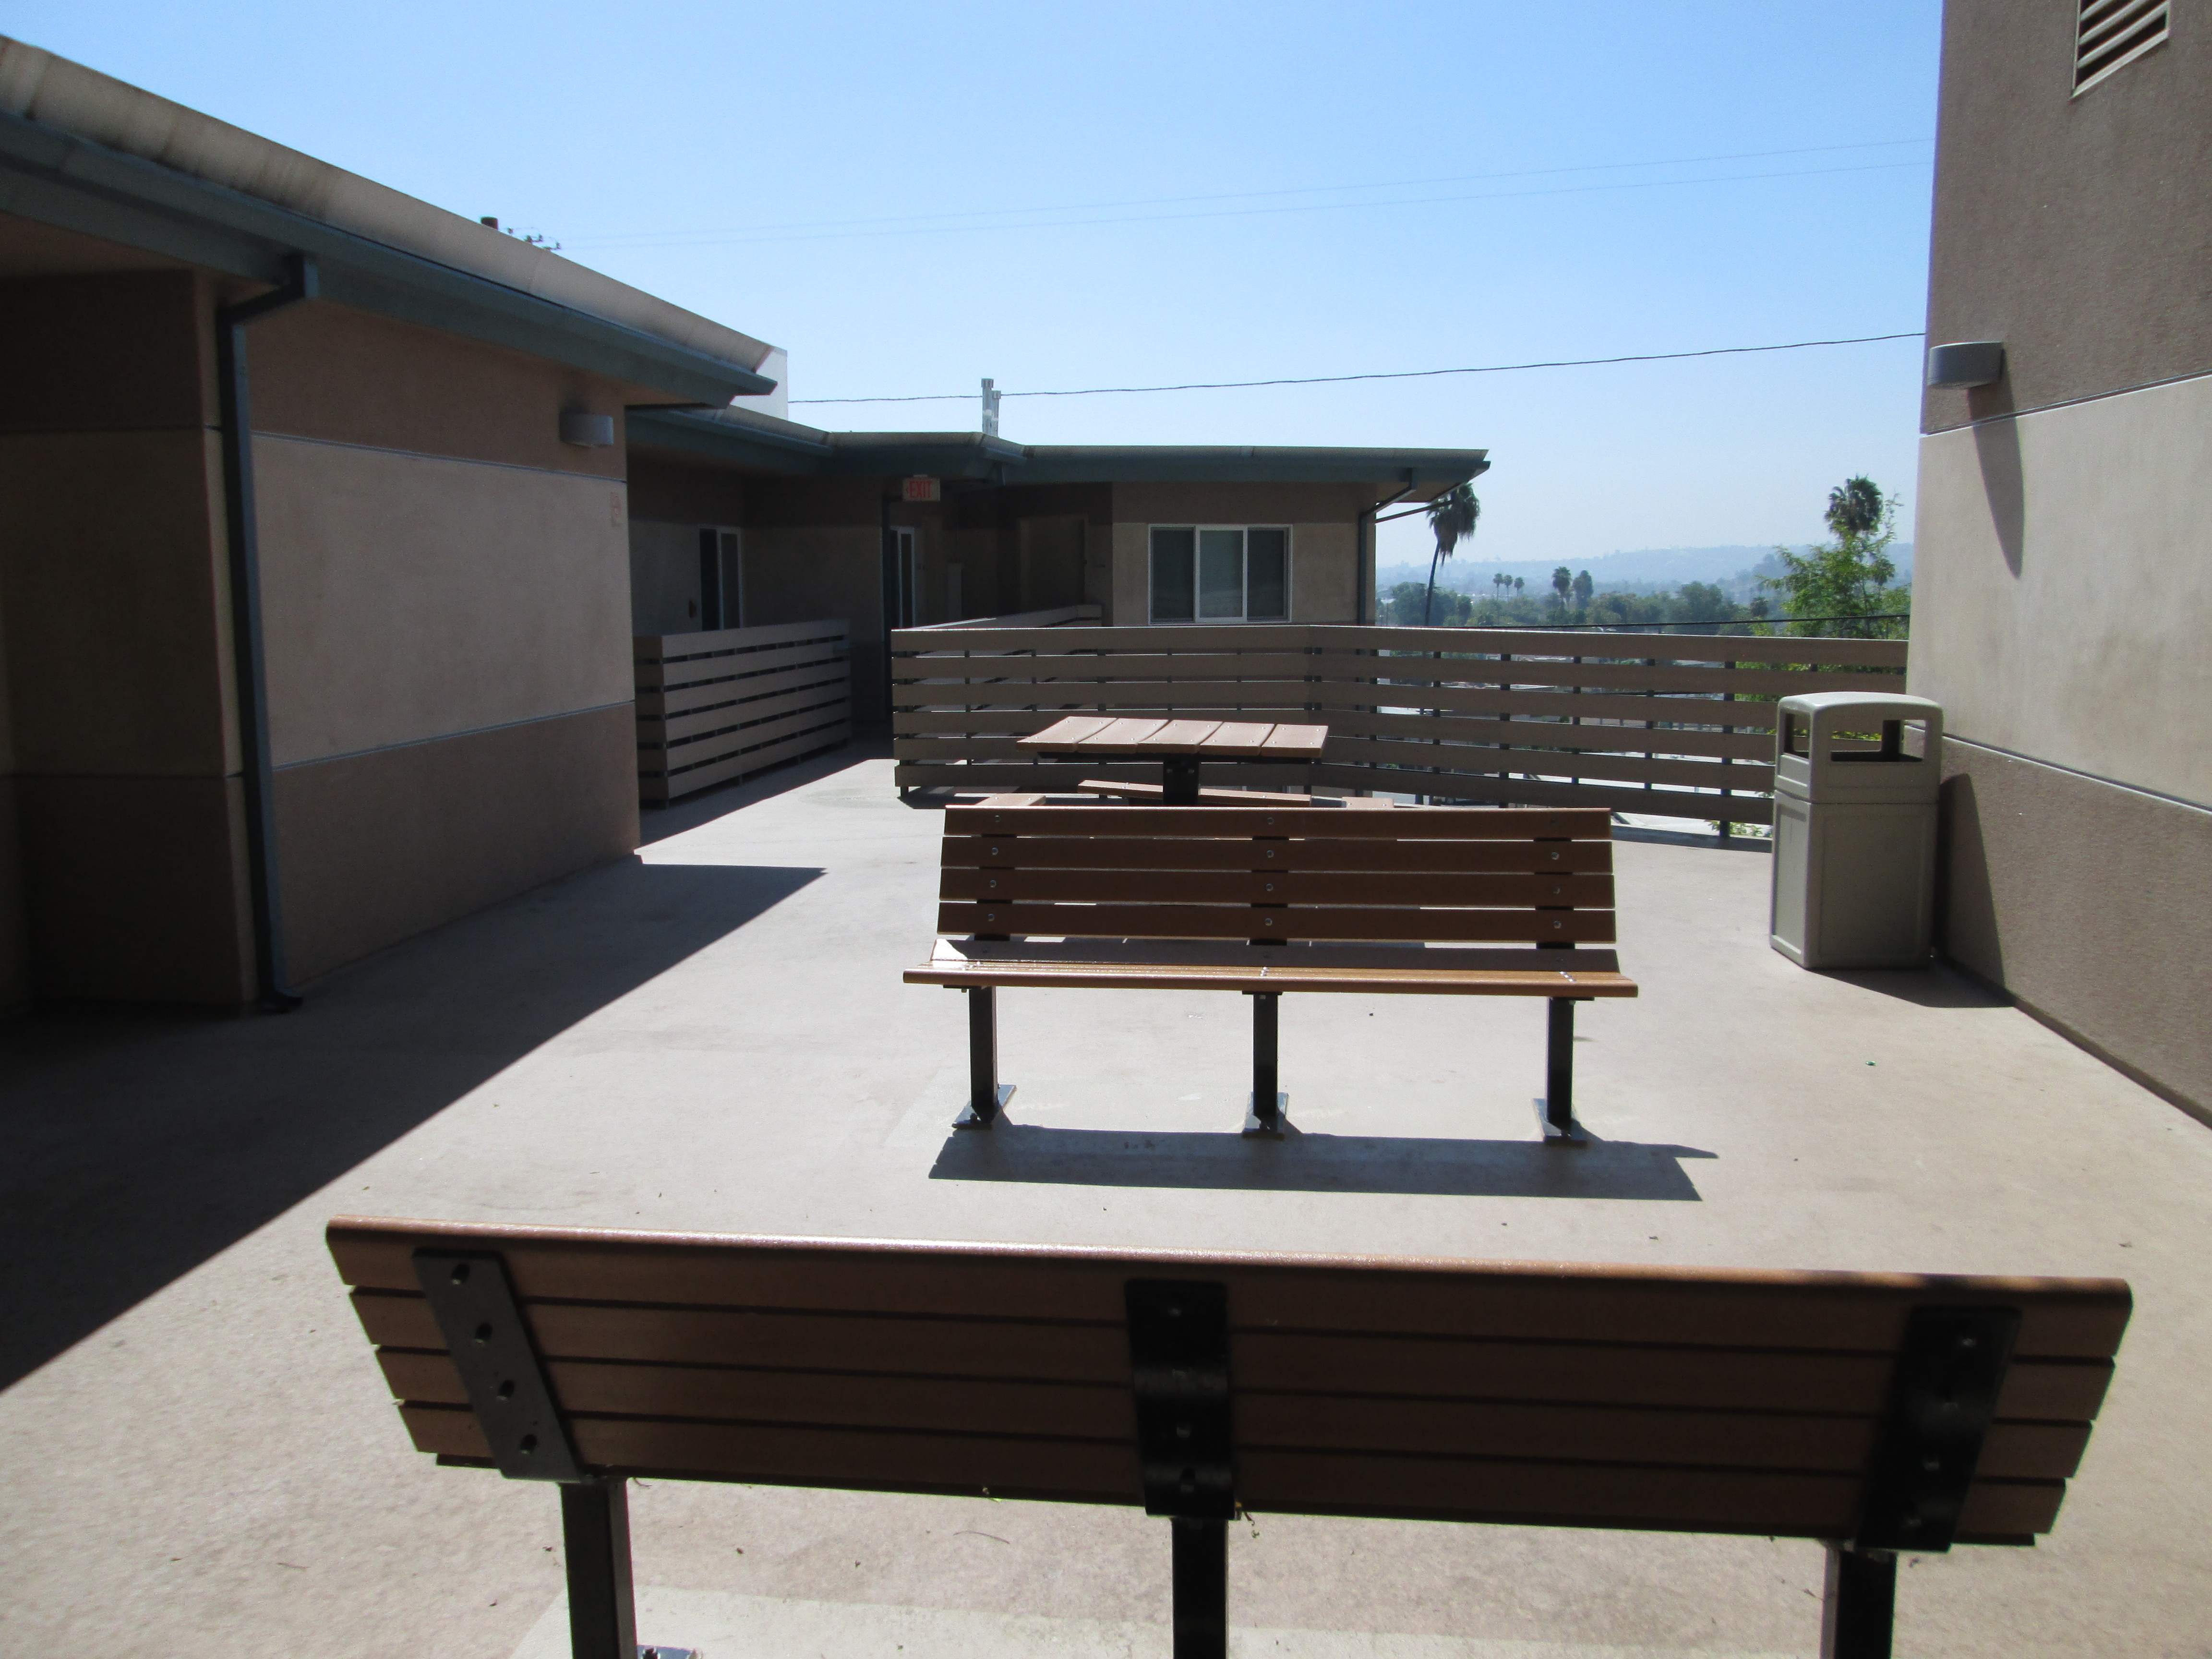 Exterior view of a common area at Cuartro Vientos showing benches and a picnic table